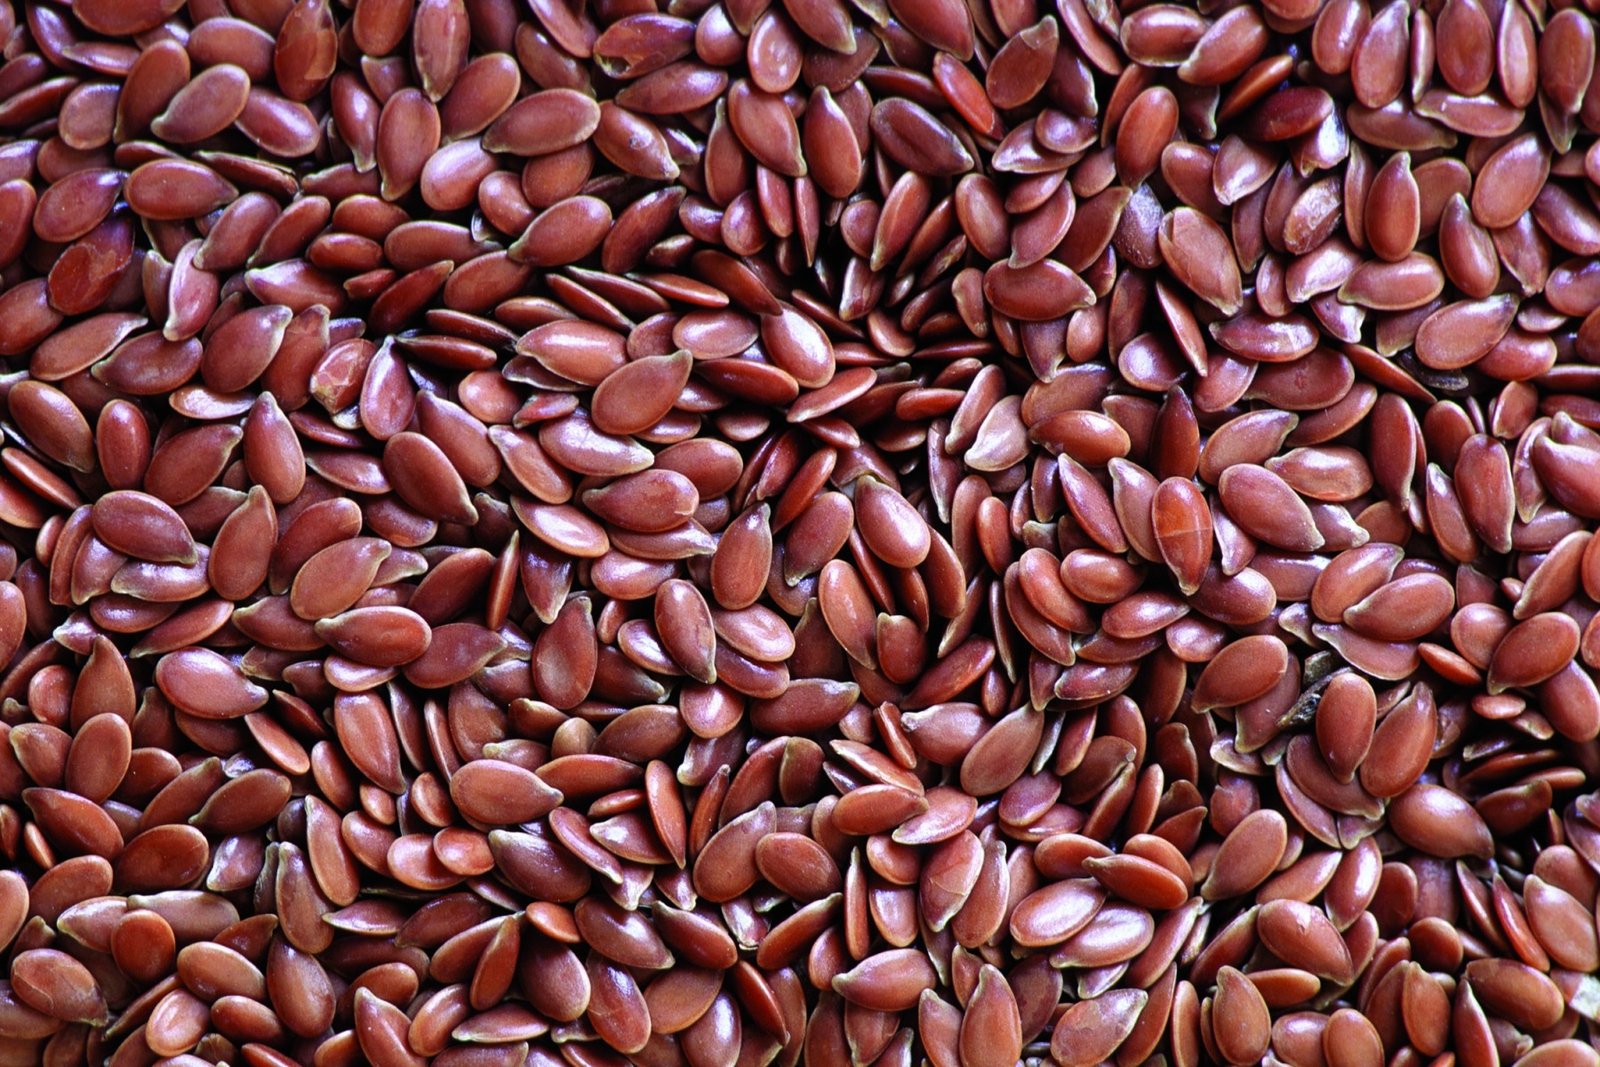 Supreme Flax Seeds/Alsee Seeds 14 Oz. (400g) - Whole Spices & Herbs -  Masalas, Spices & Herbs - Grocery